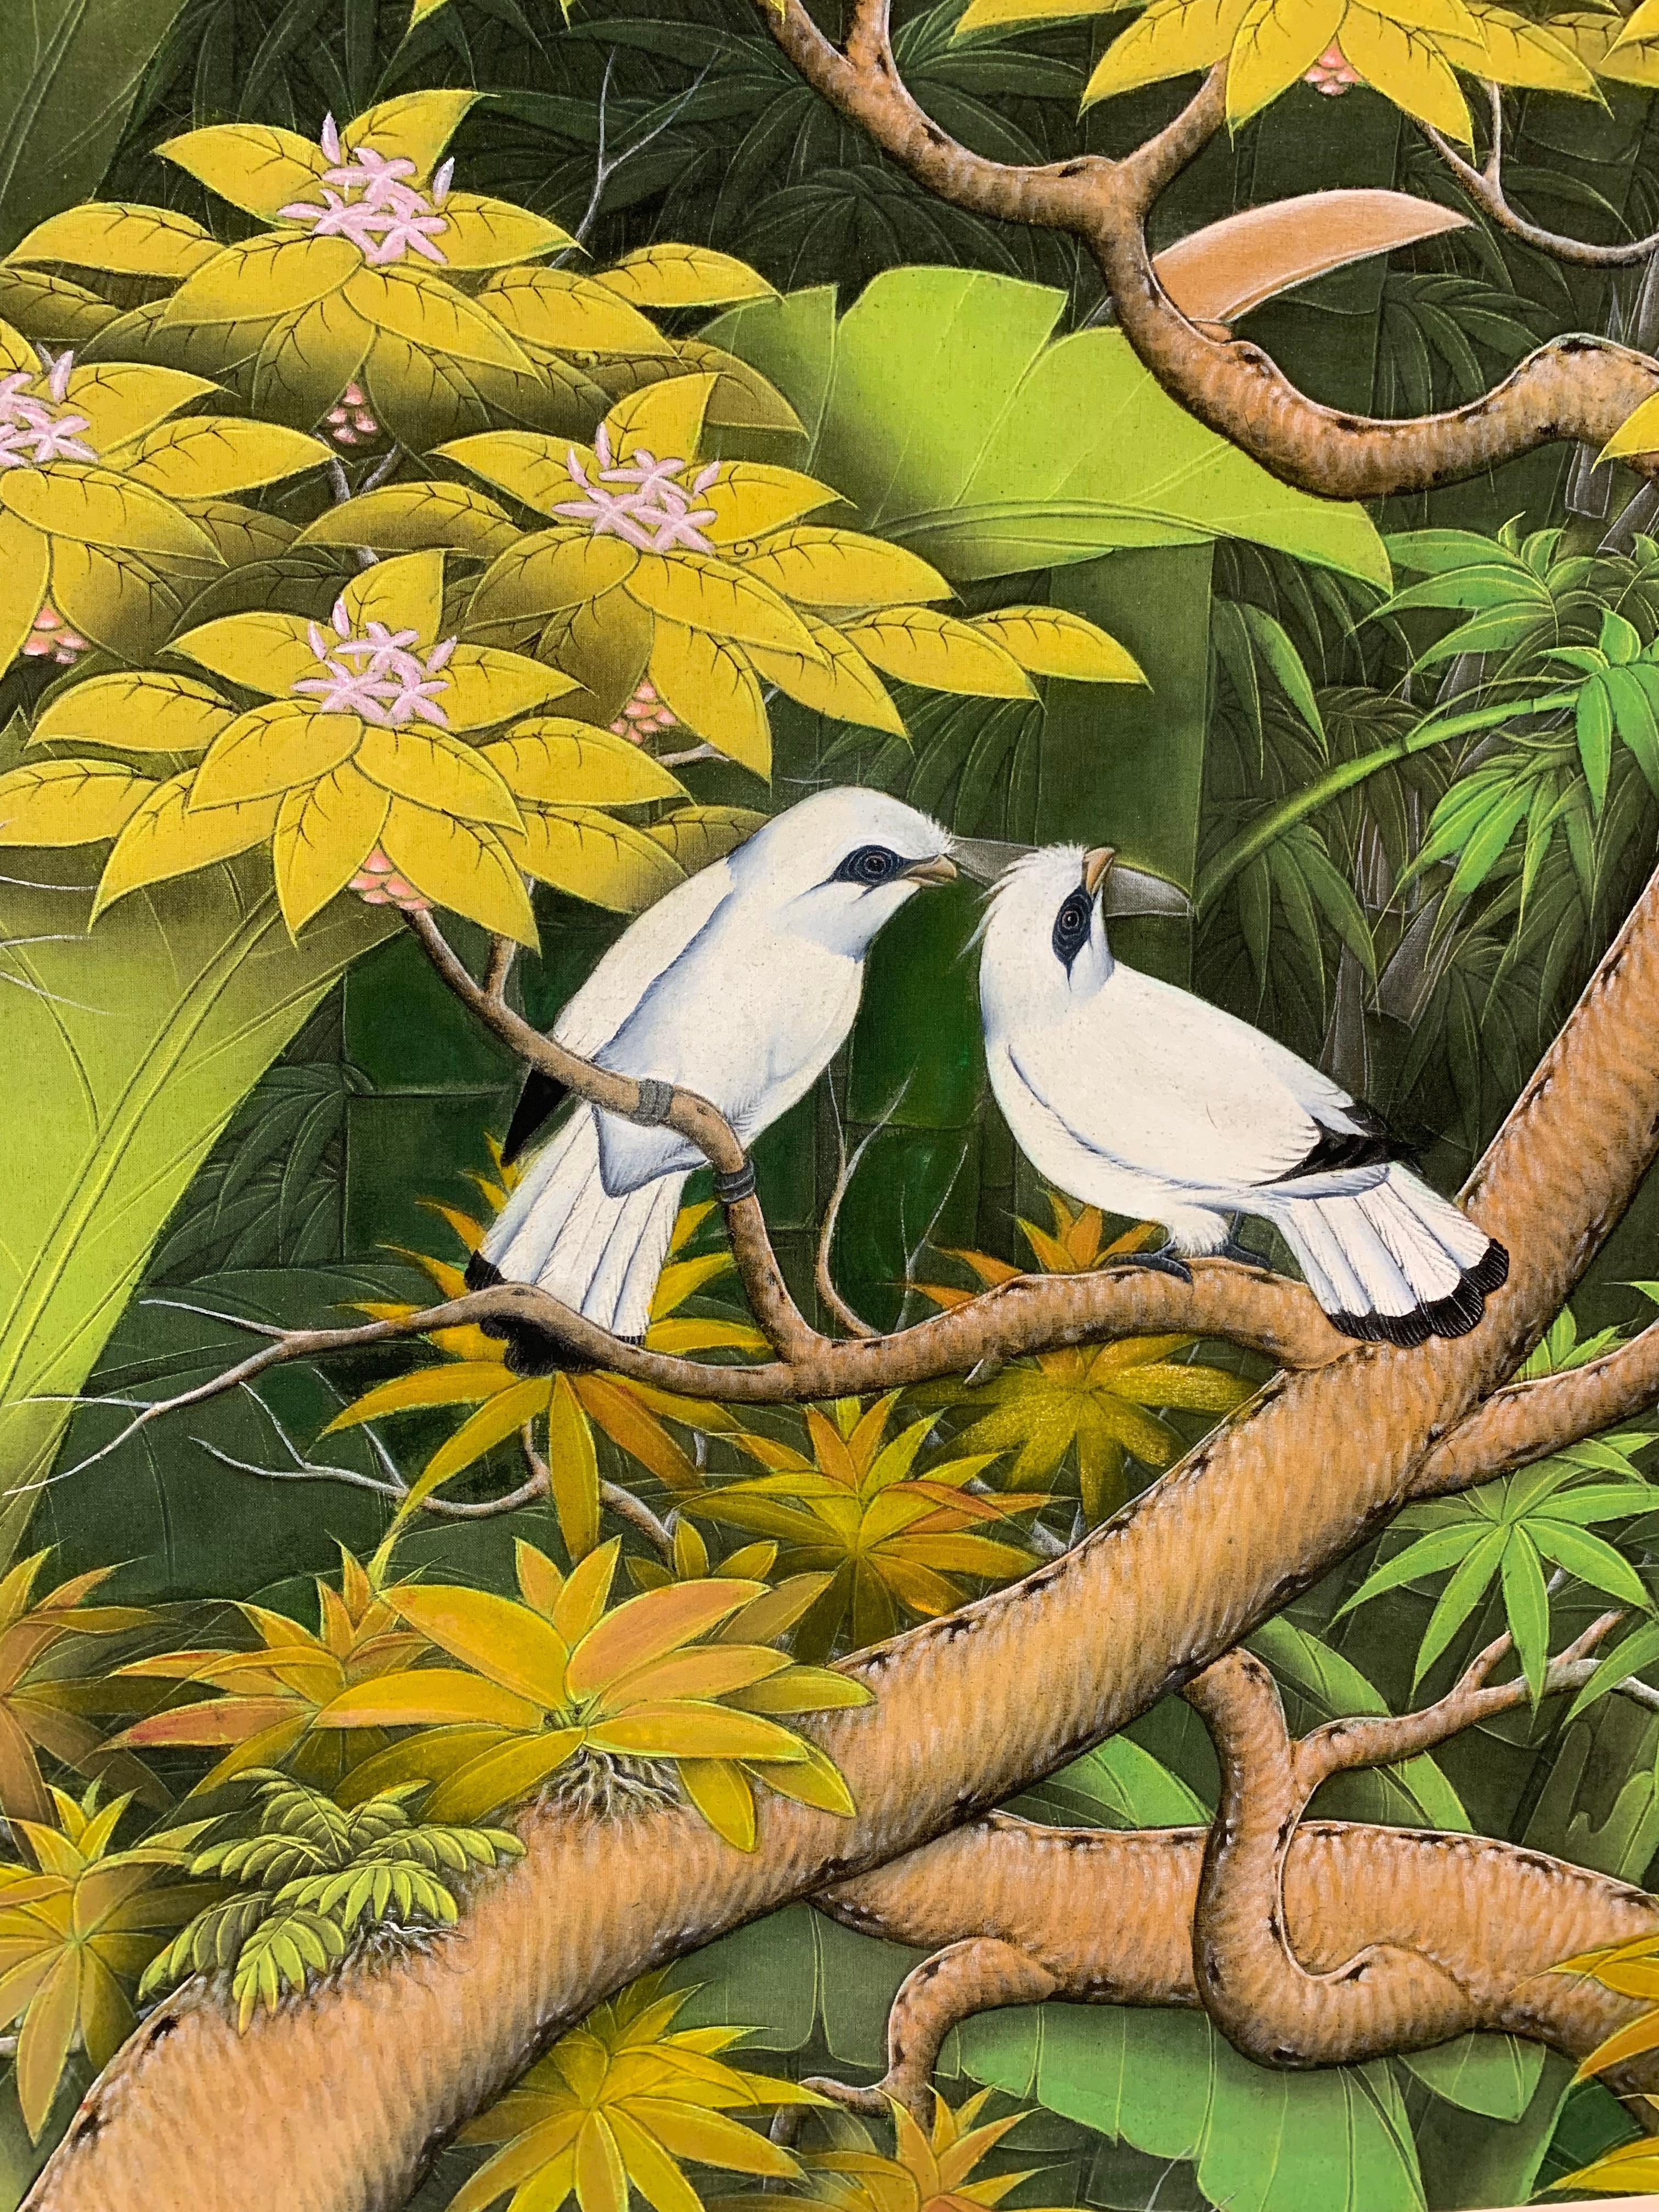 Summer Love by Katharina Husslein contemporary birds and jungle landscape 2